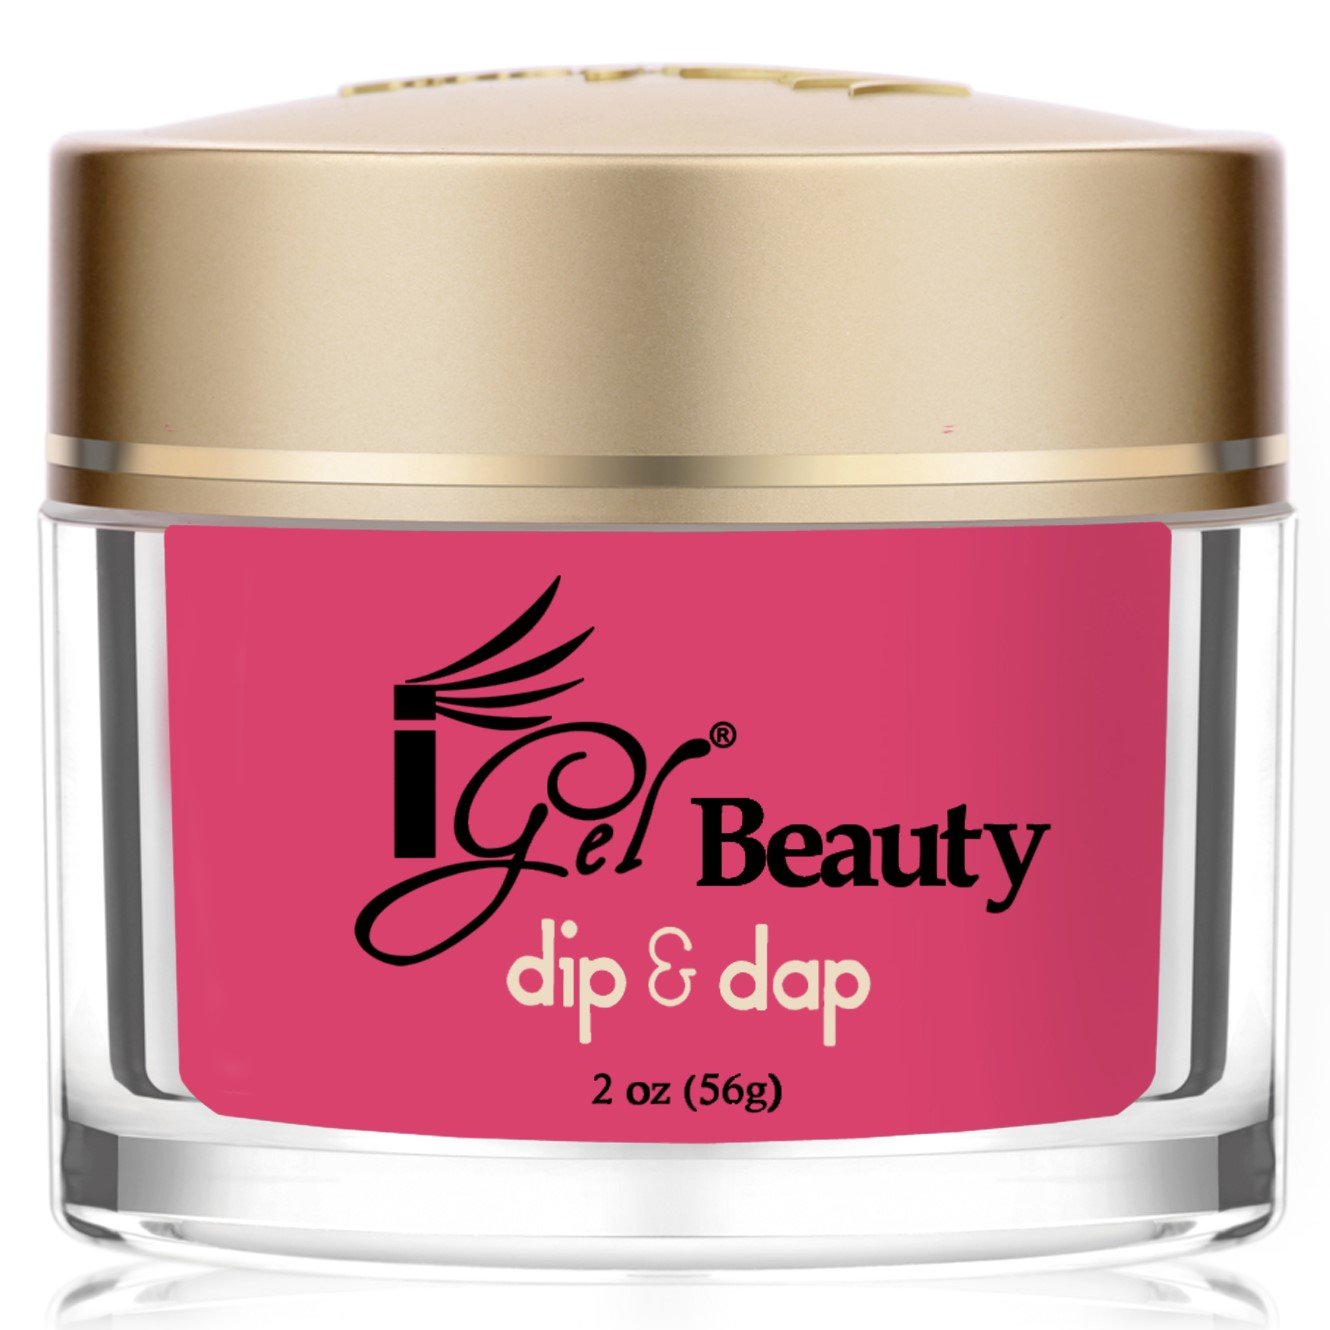 iGel Beauty - Dip & Dap Powder - DD048 Jazzberry Jam - RECOMMENDED FOR DIP